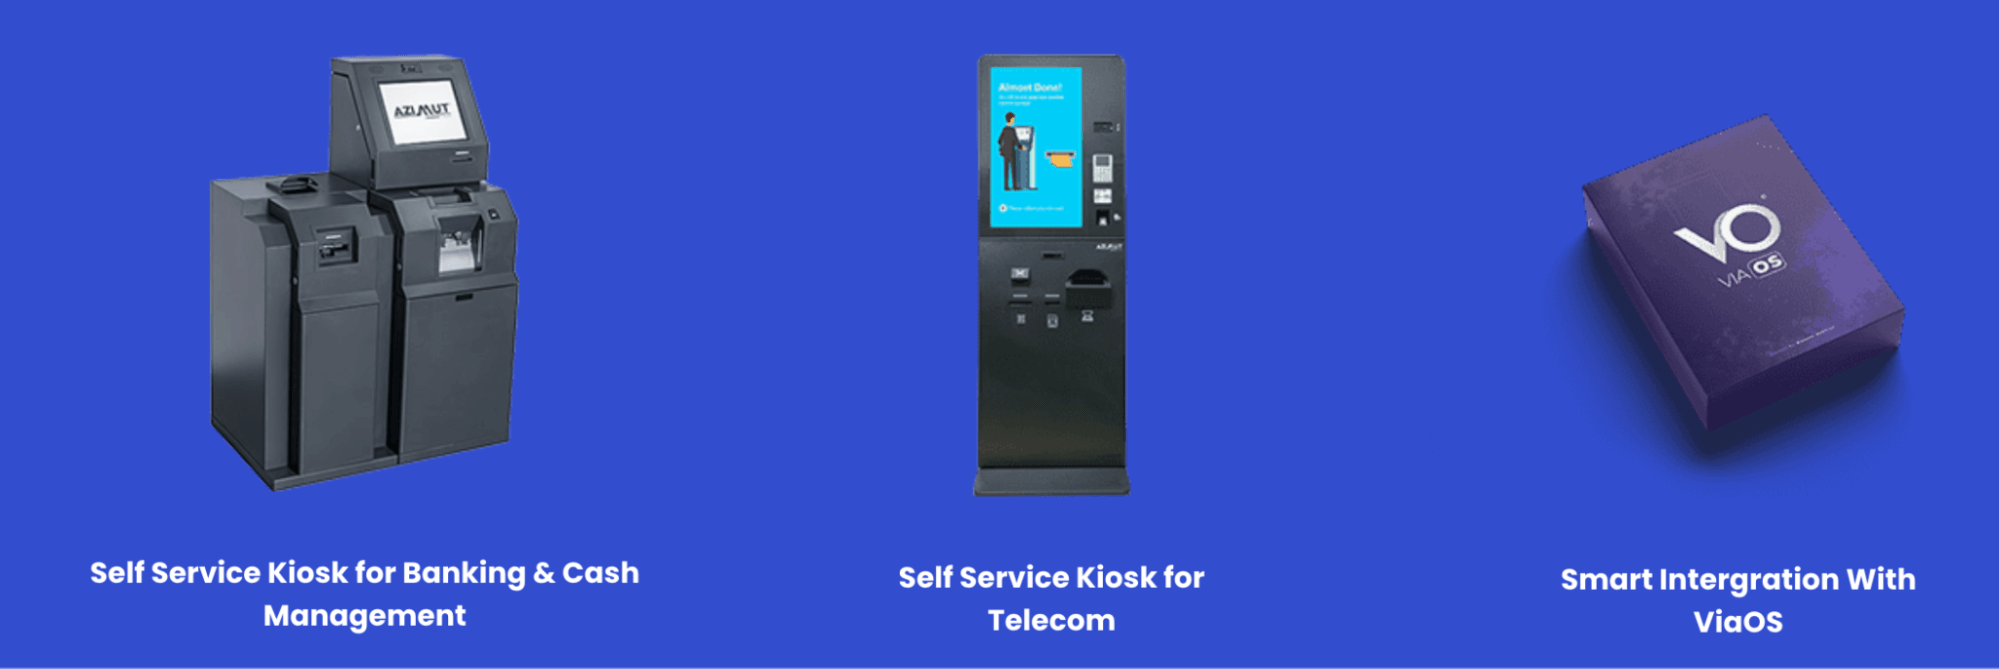 Self-service kiosks for convenient and efficient customer interactions